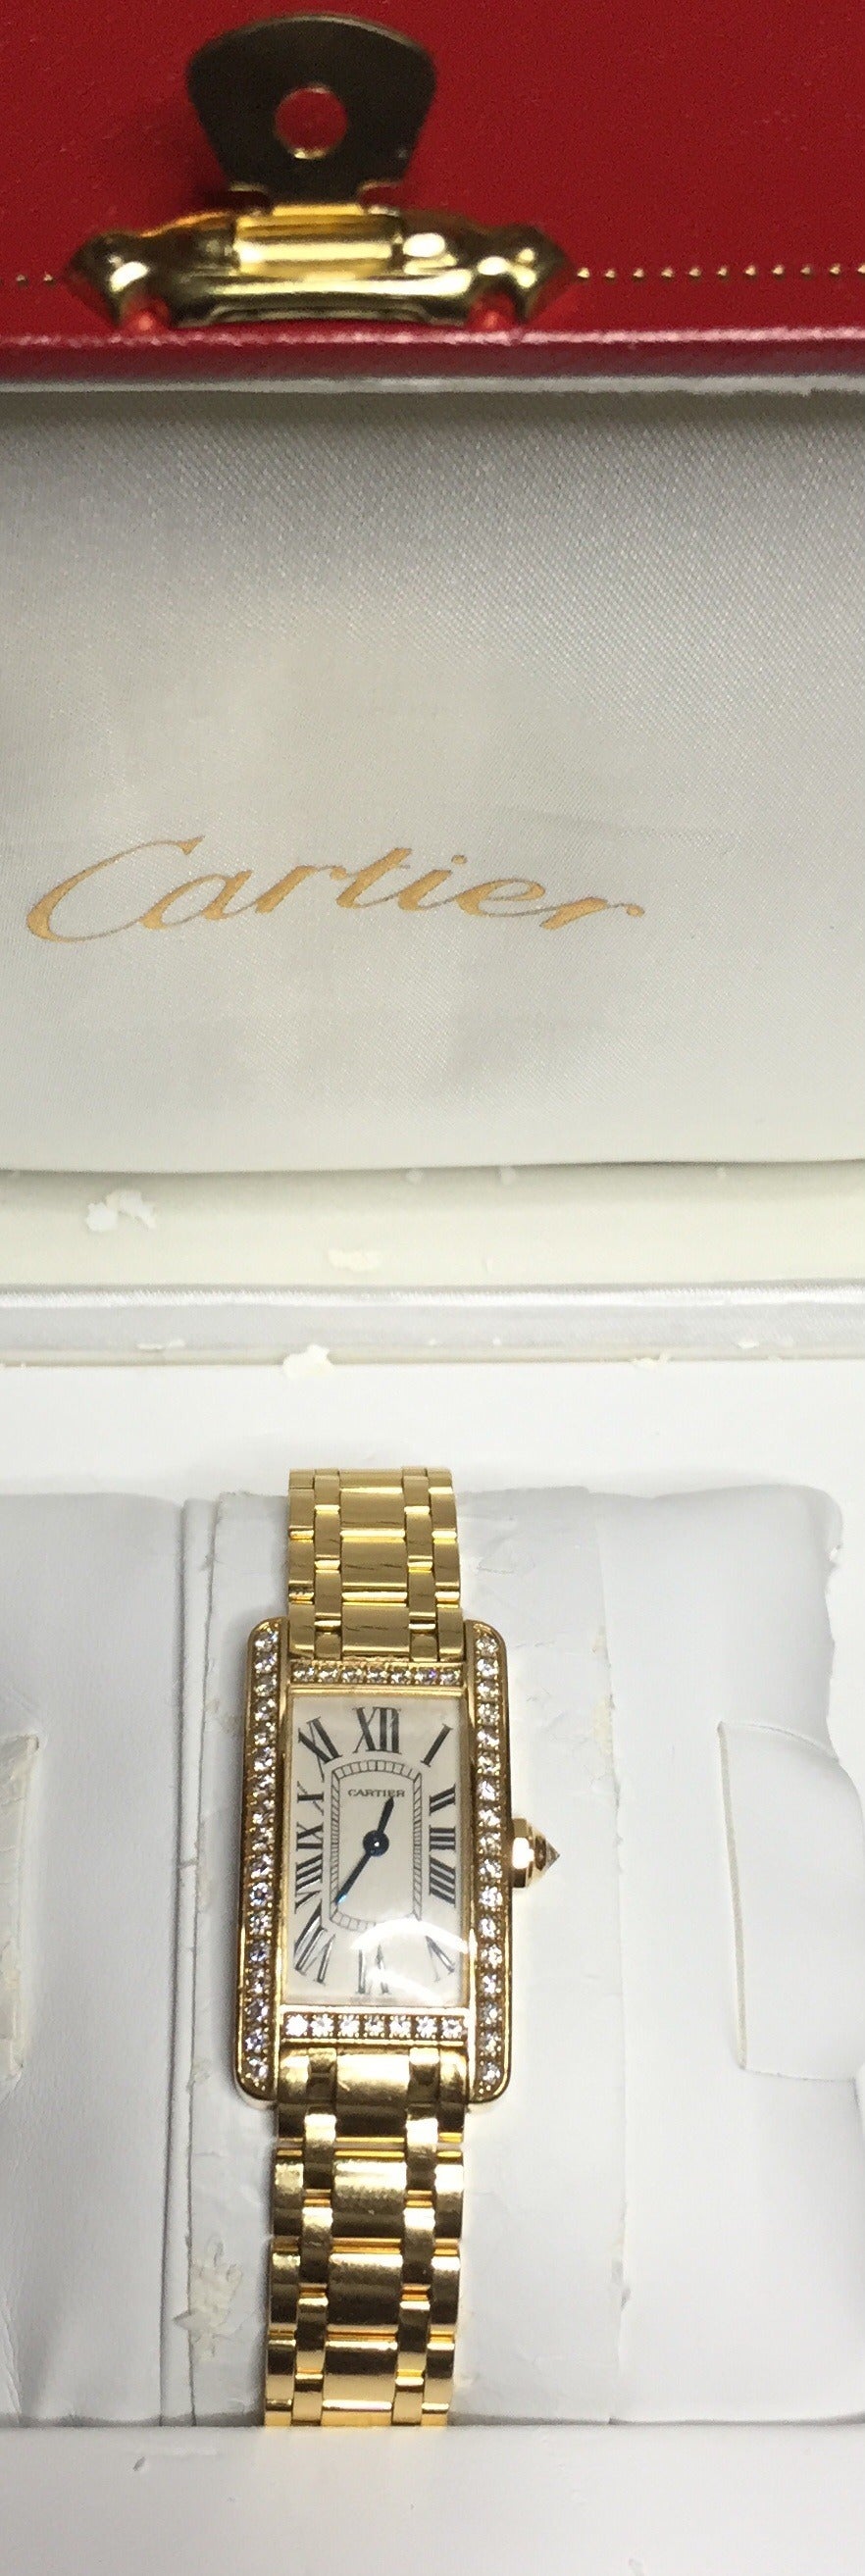 Cartier Ladies 18kt Yellow Gold Tank Americaine Diamond Case Gorgeous Rare Watch In Excellent Condition For Sale In Lake Park, FL